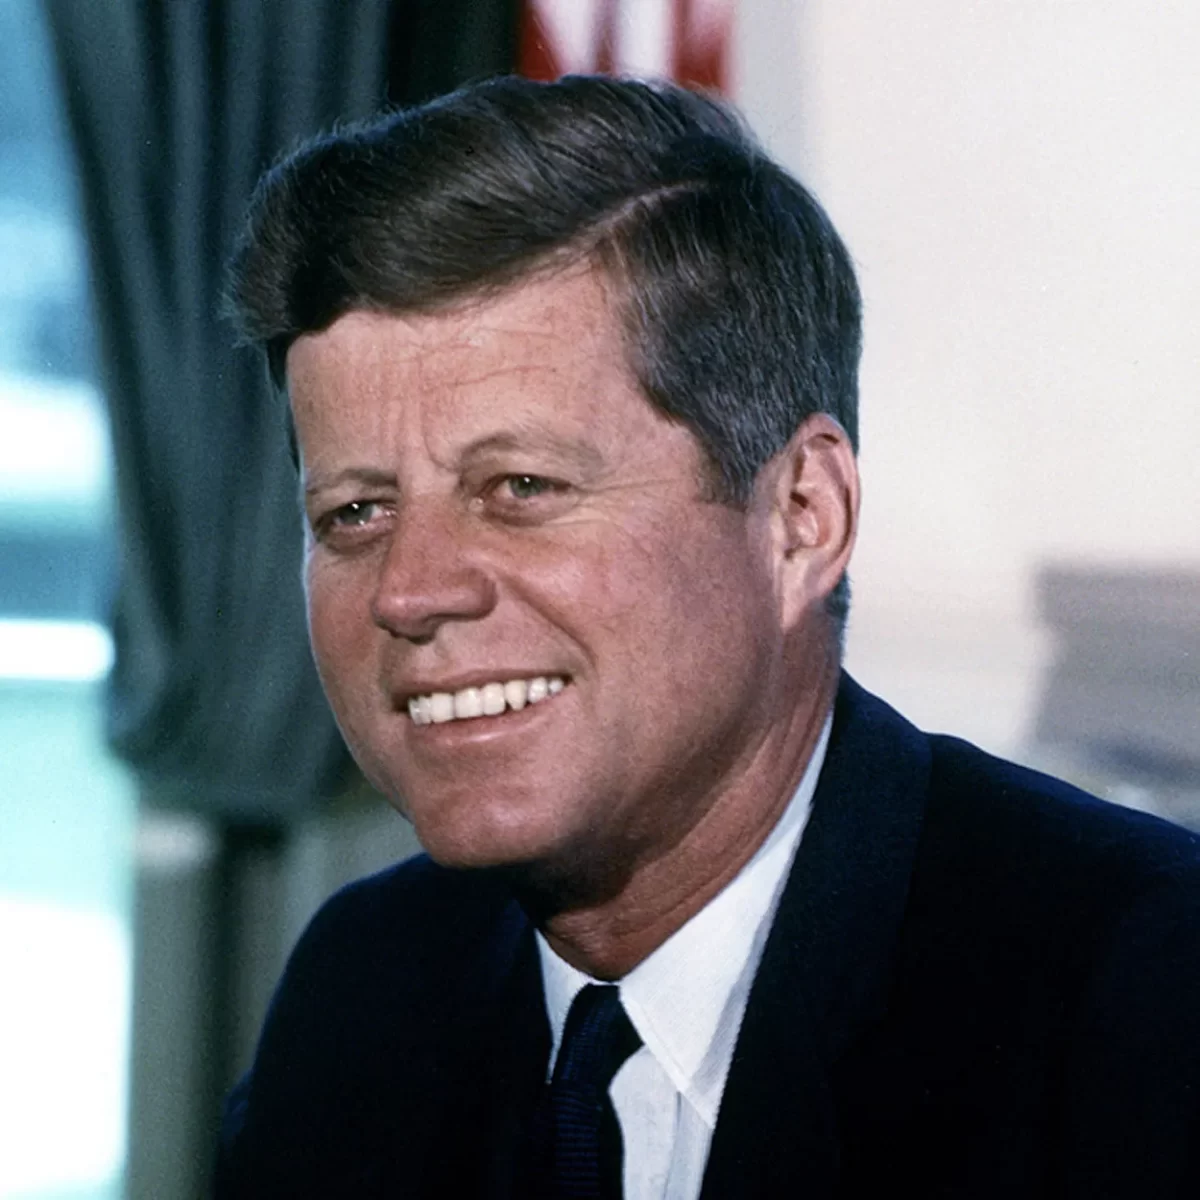 John F Kennedy in the White House 